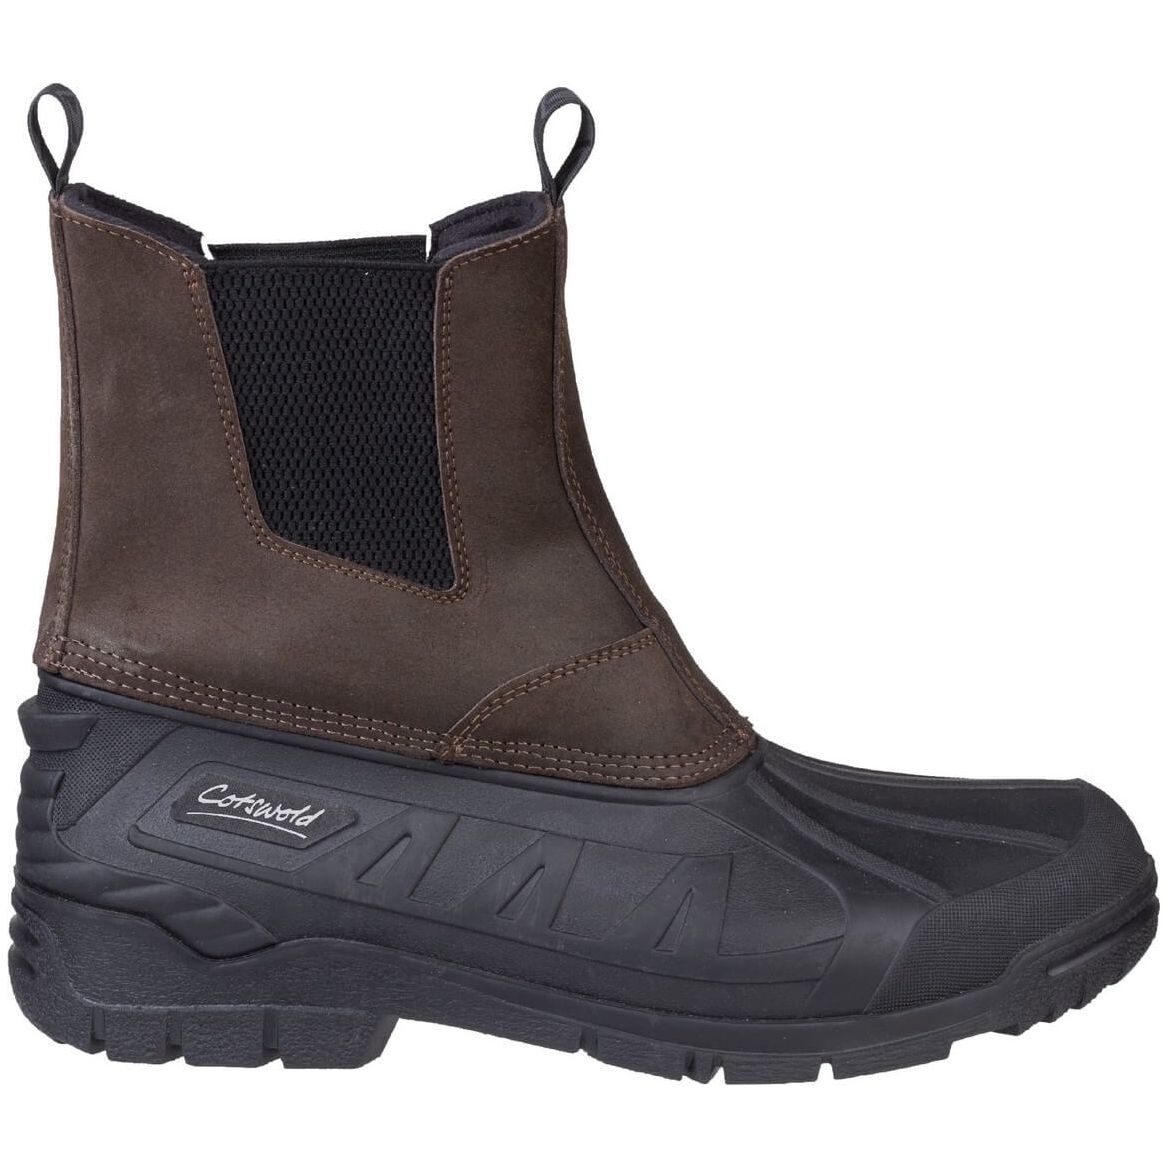 Cotswold Whiteway Hybrid Dealer Boots-Brown-4